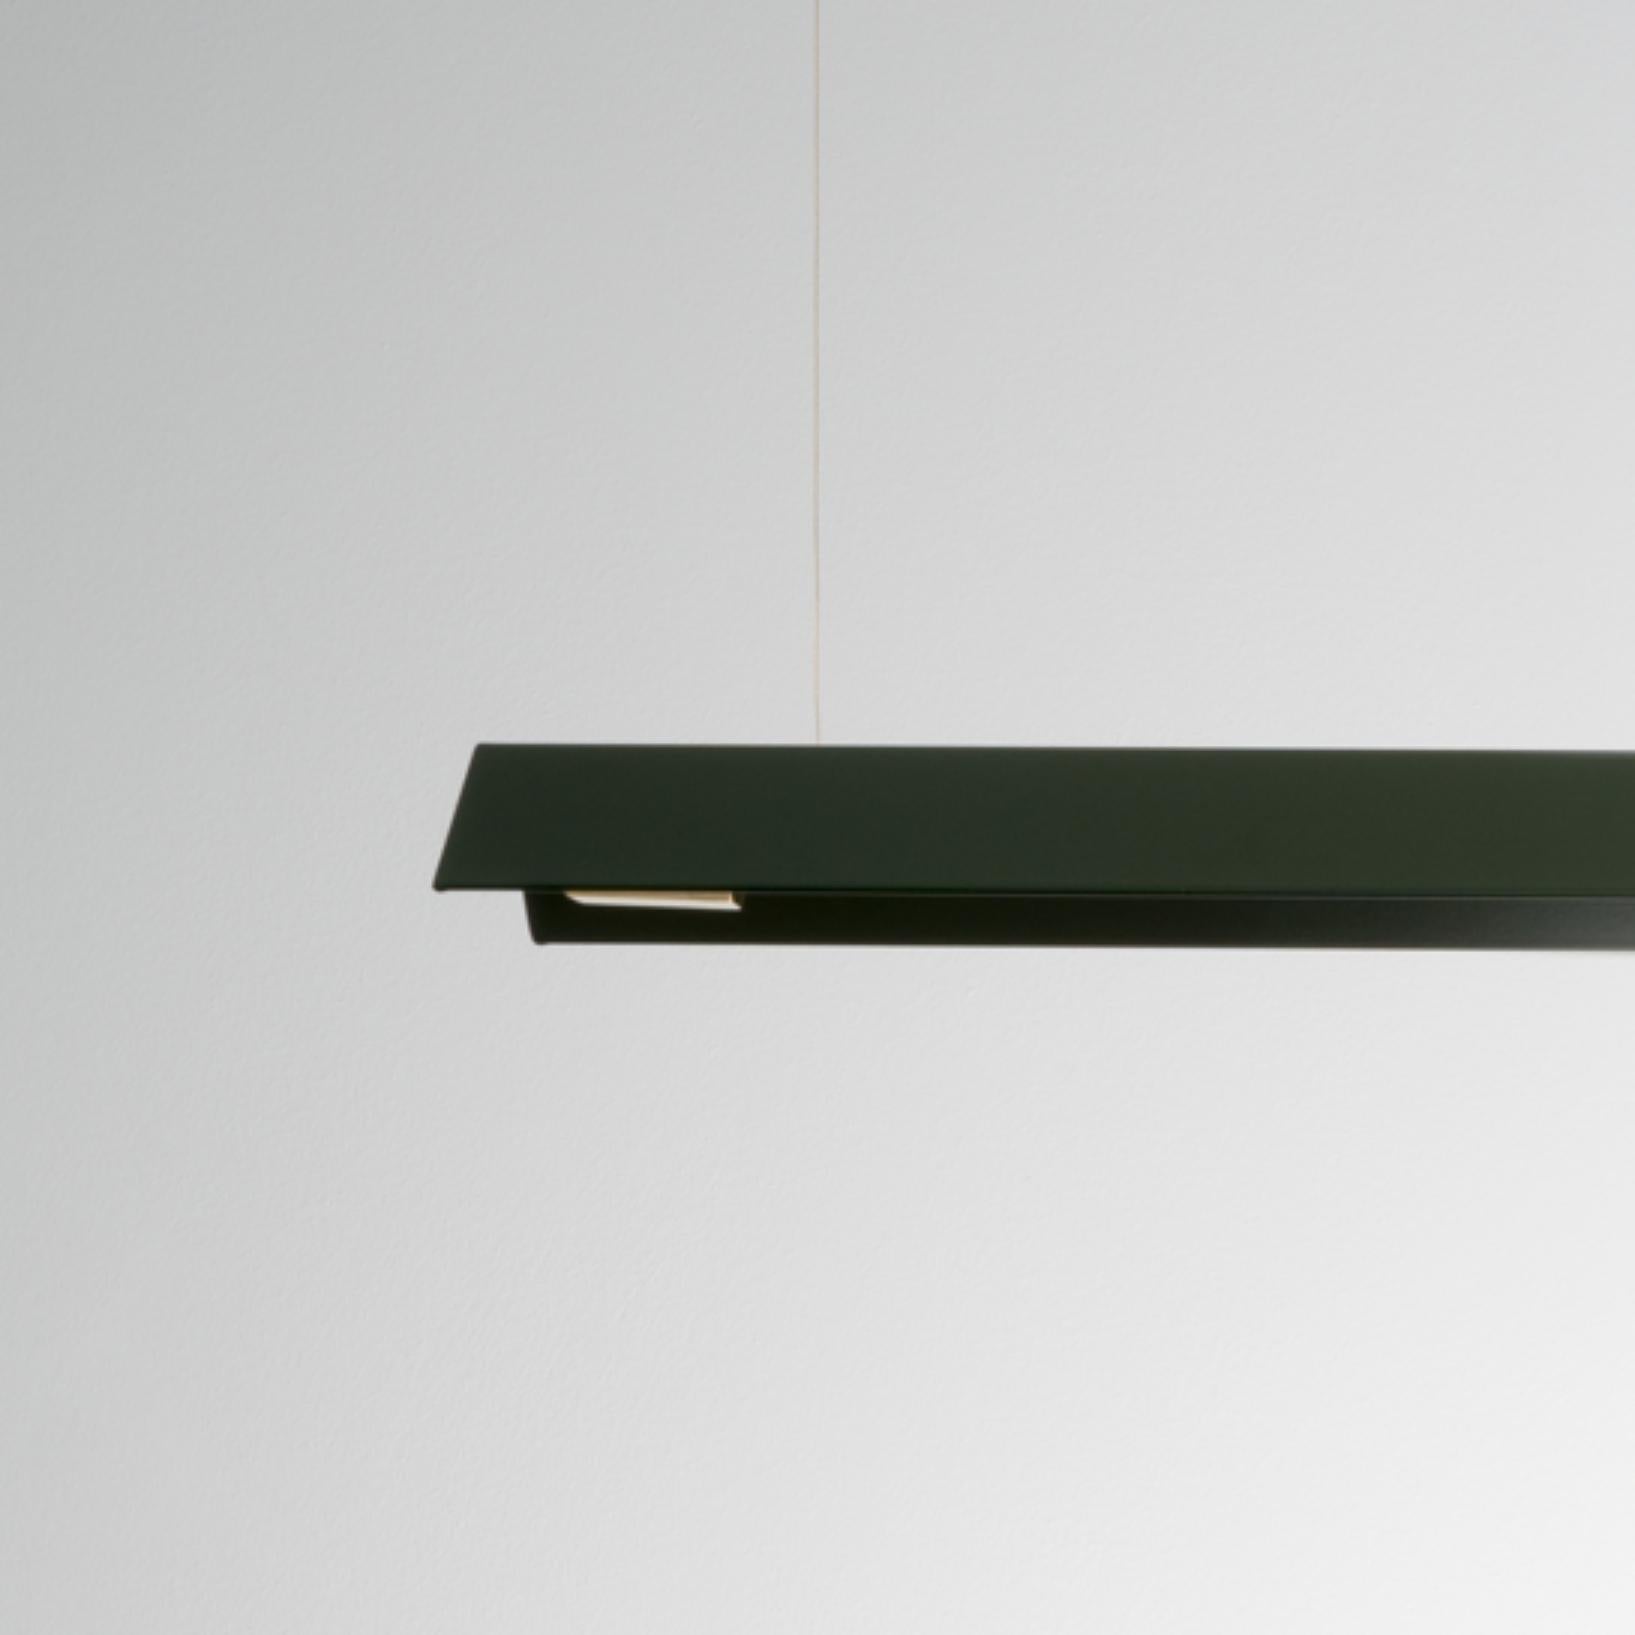 Large Misalliance Ex bottle green suspended light by Lexavala
Dimensions: D 16 x W 130 x H 8 cm
Materials: powder coated shade with details made of brass or stainless steel.

There are two lenghts of socket covers, extending over the LED. Two